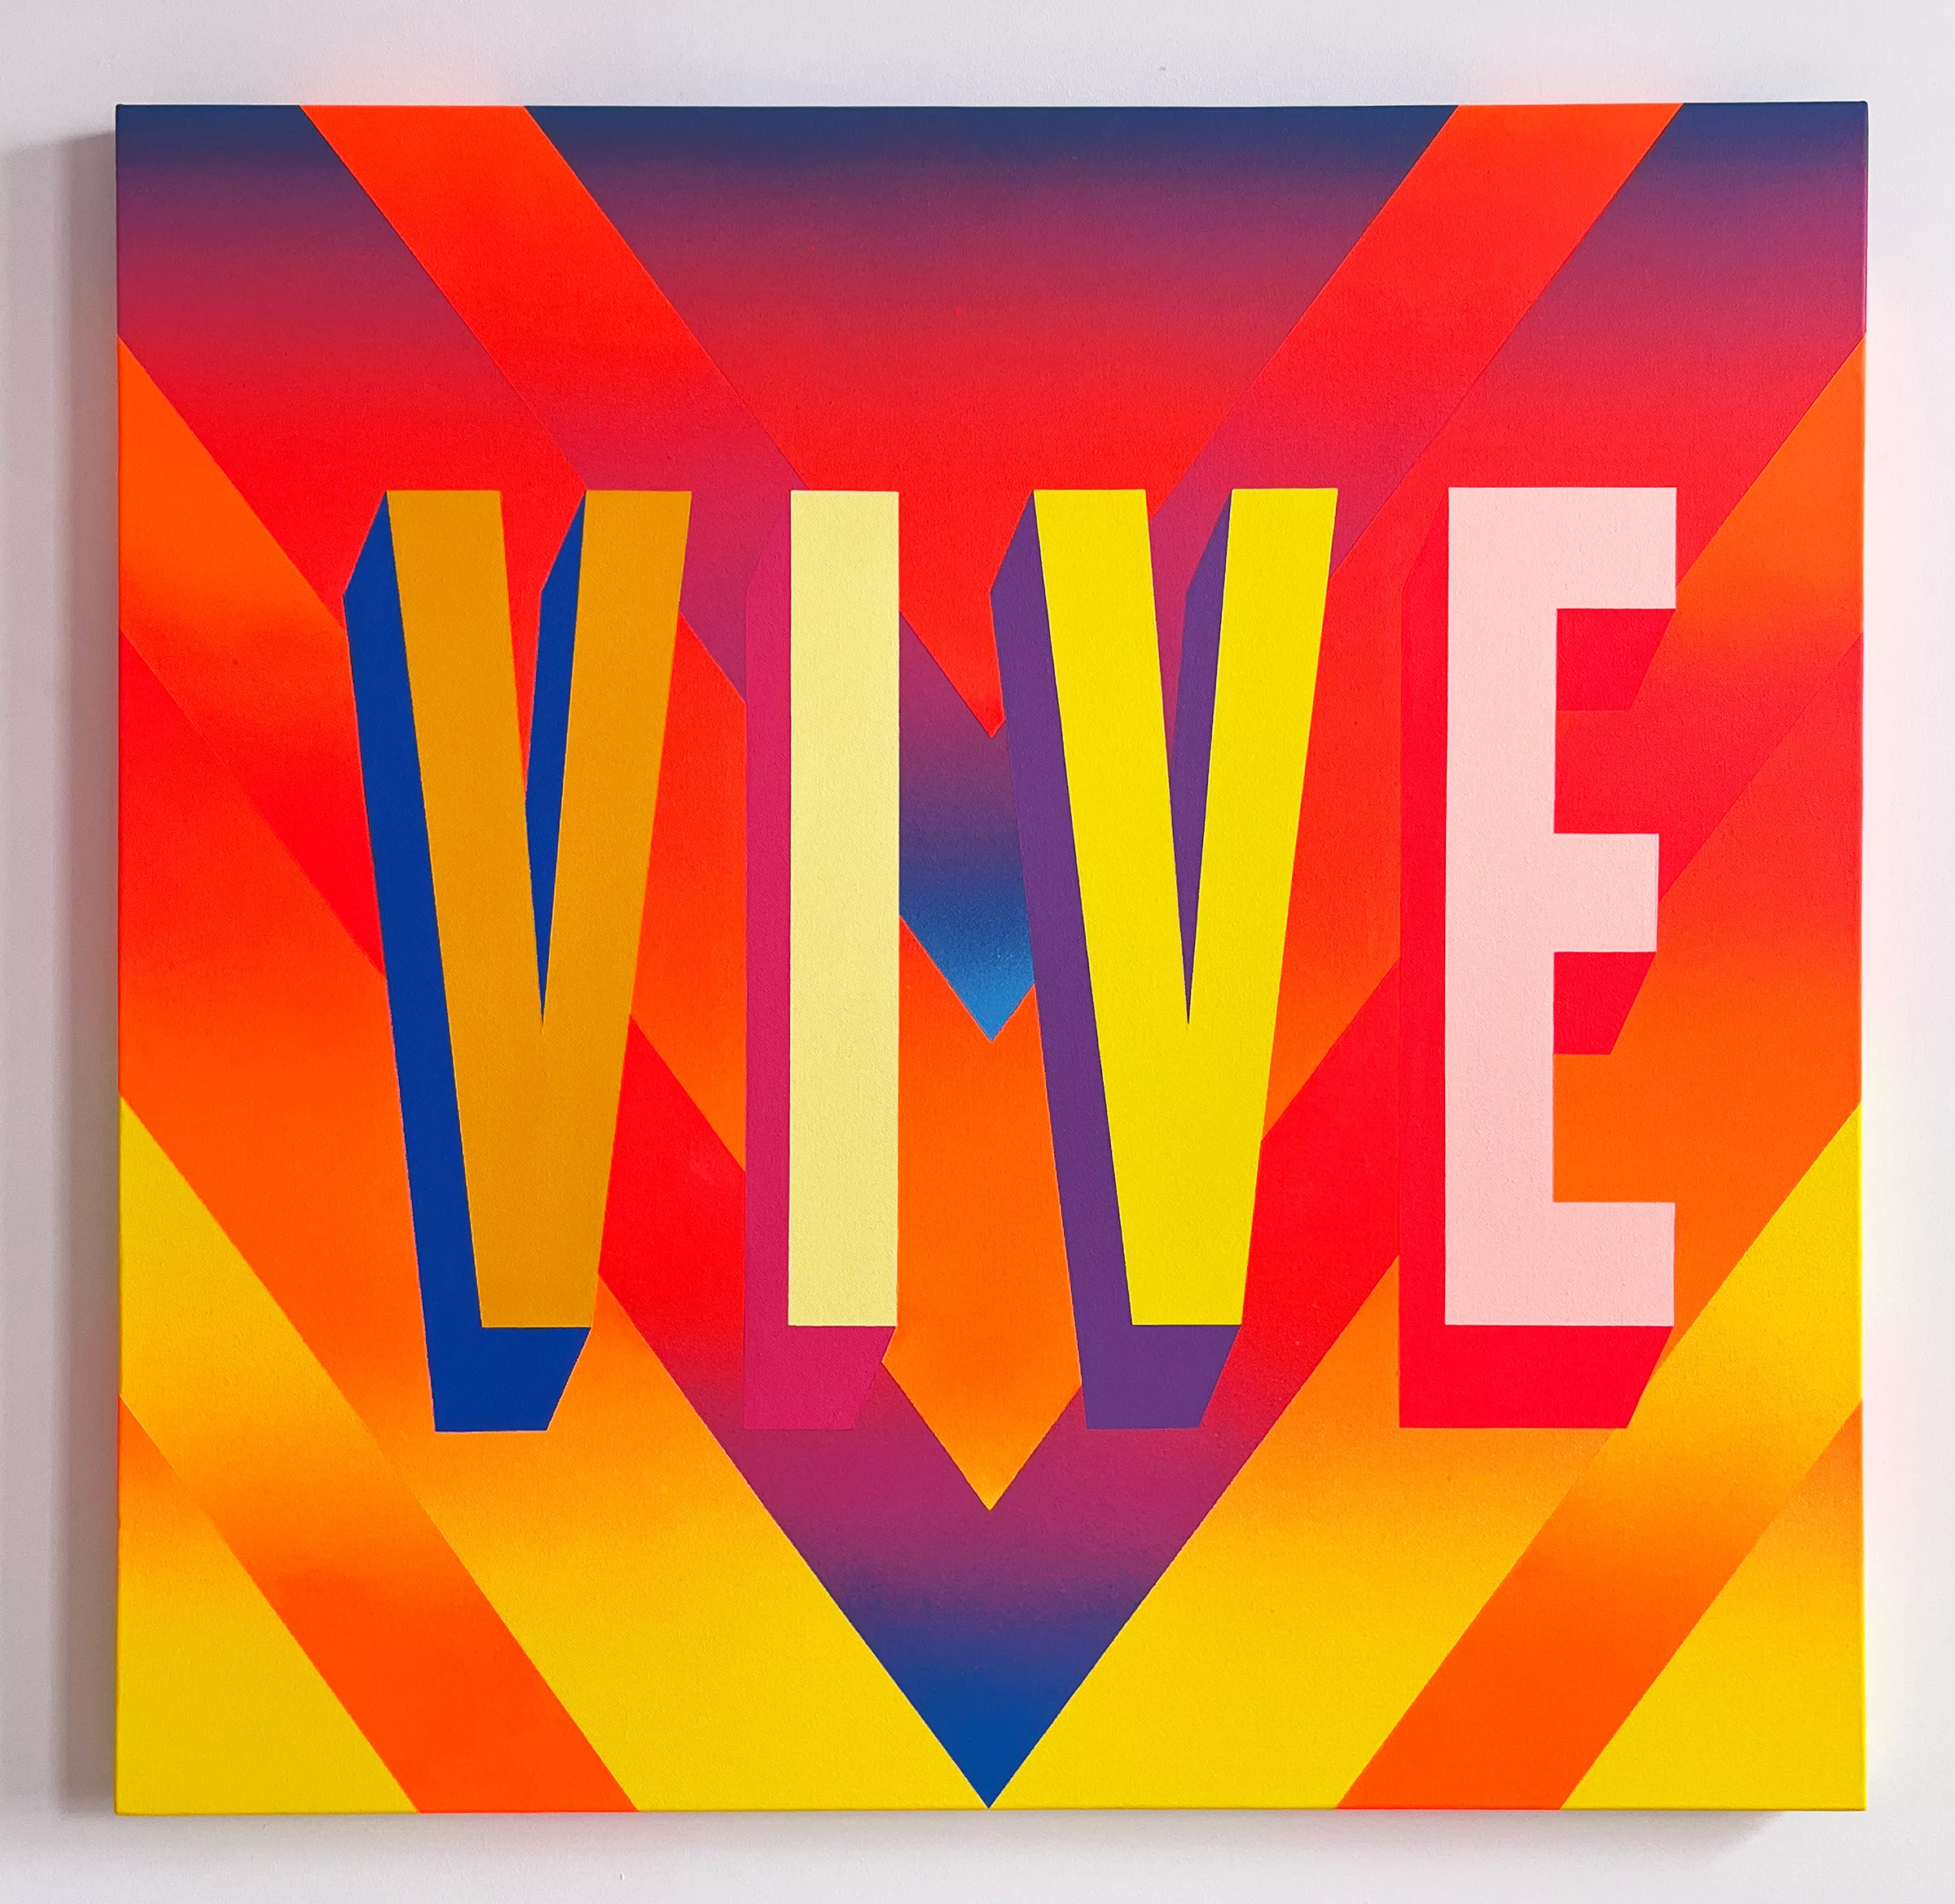 Vive, acrylic on canvas by Queen Andrea in 2024